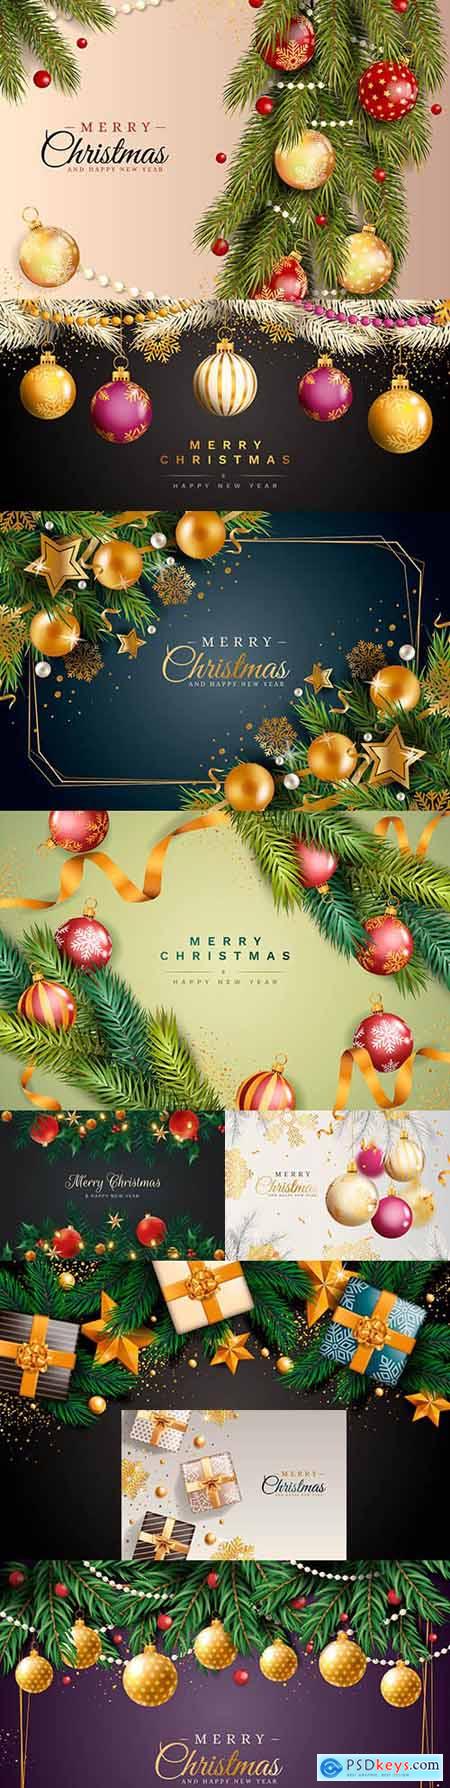 Christmas and New Year design festive realistic background